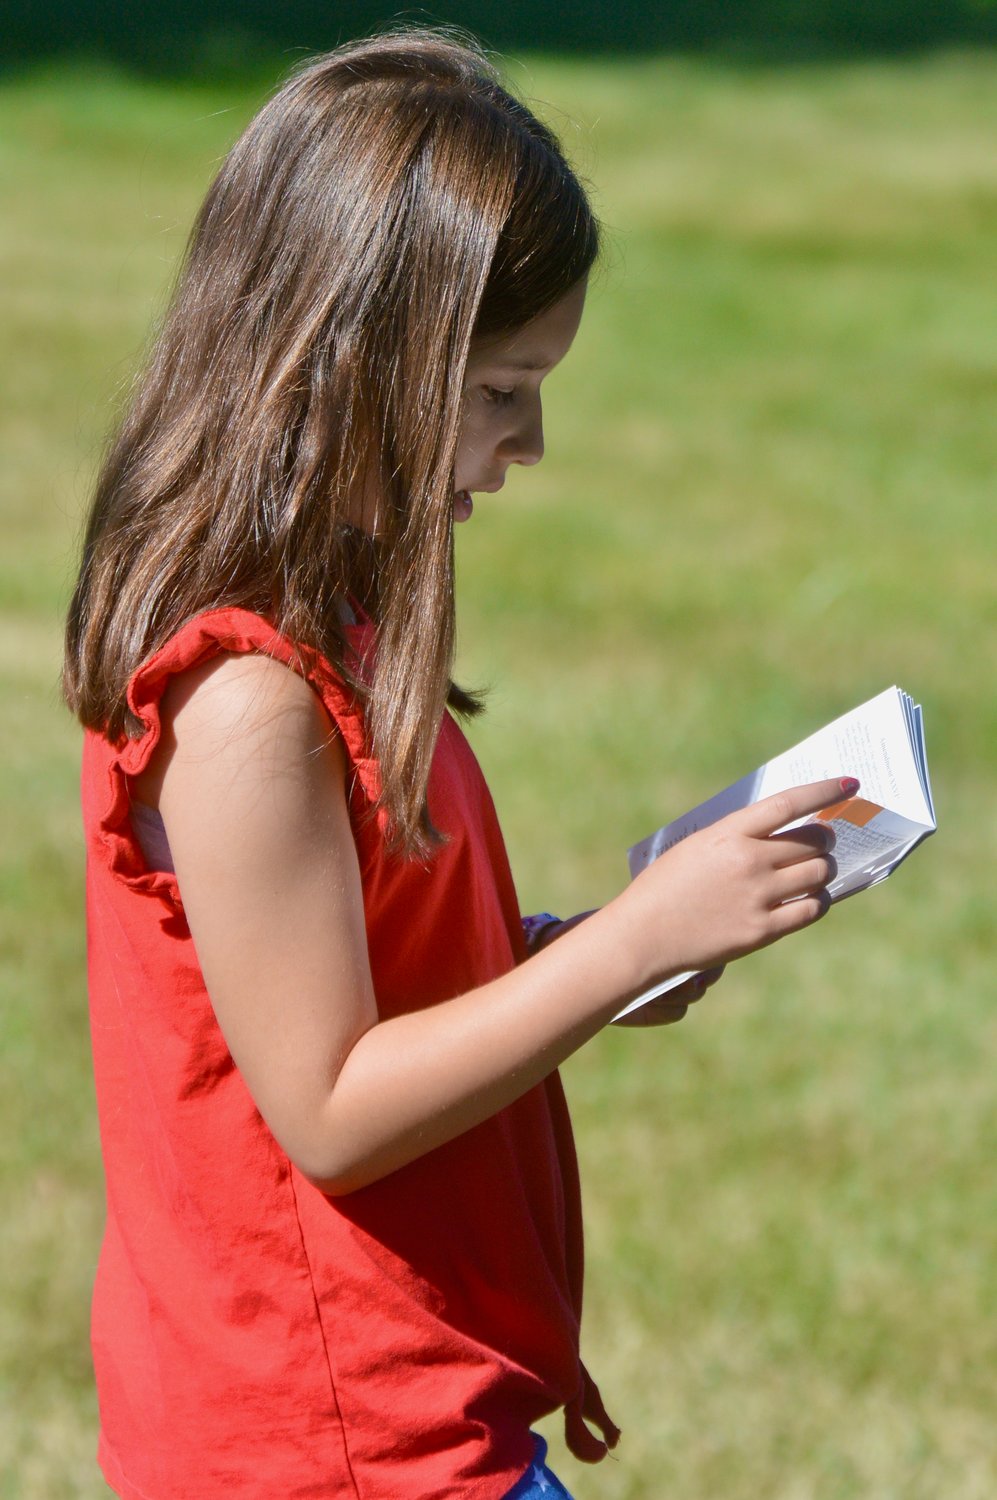 Morgan Shiner, 9, takes her turn reading a passage. She was visiting the area from Philadelphia along with her family.